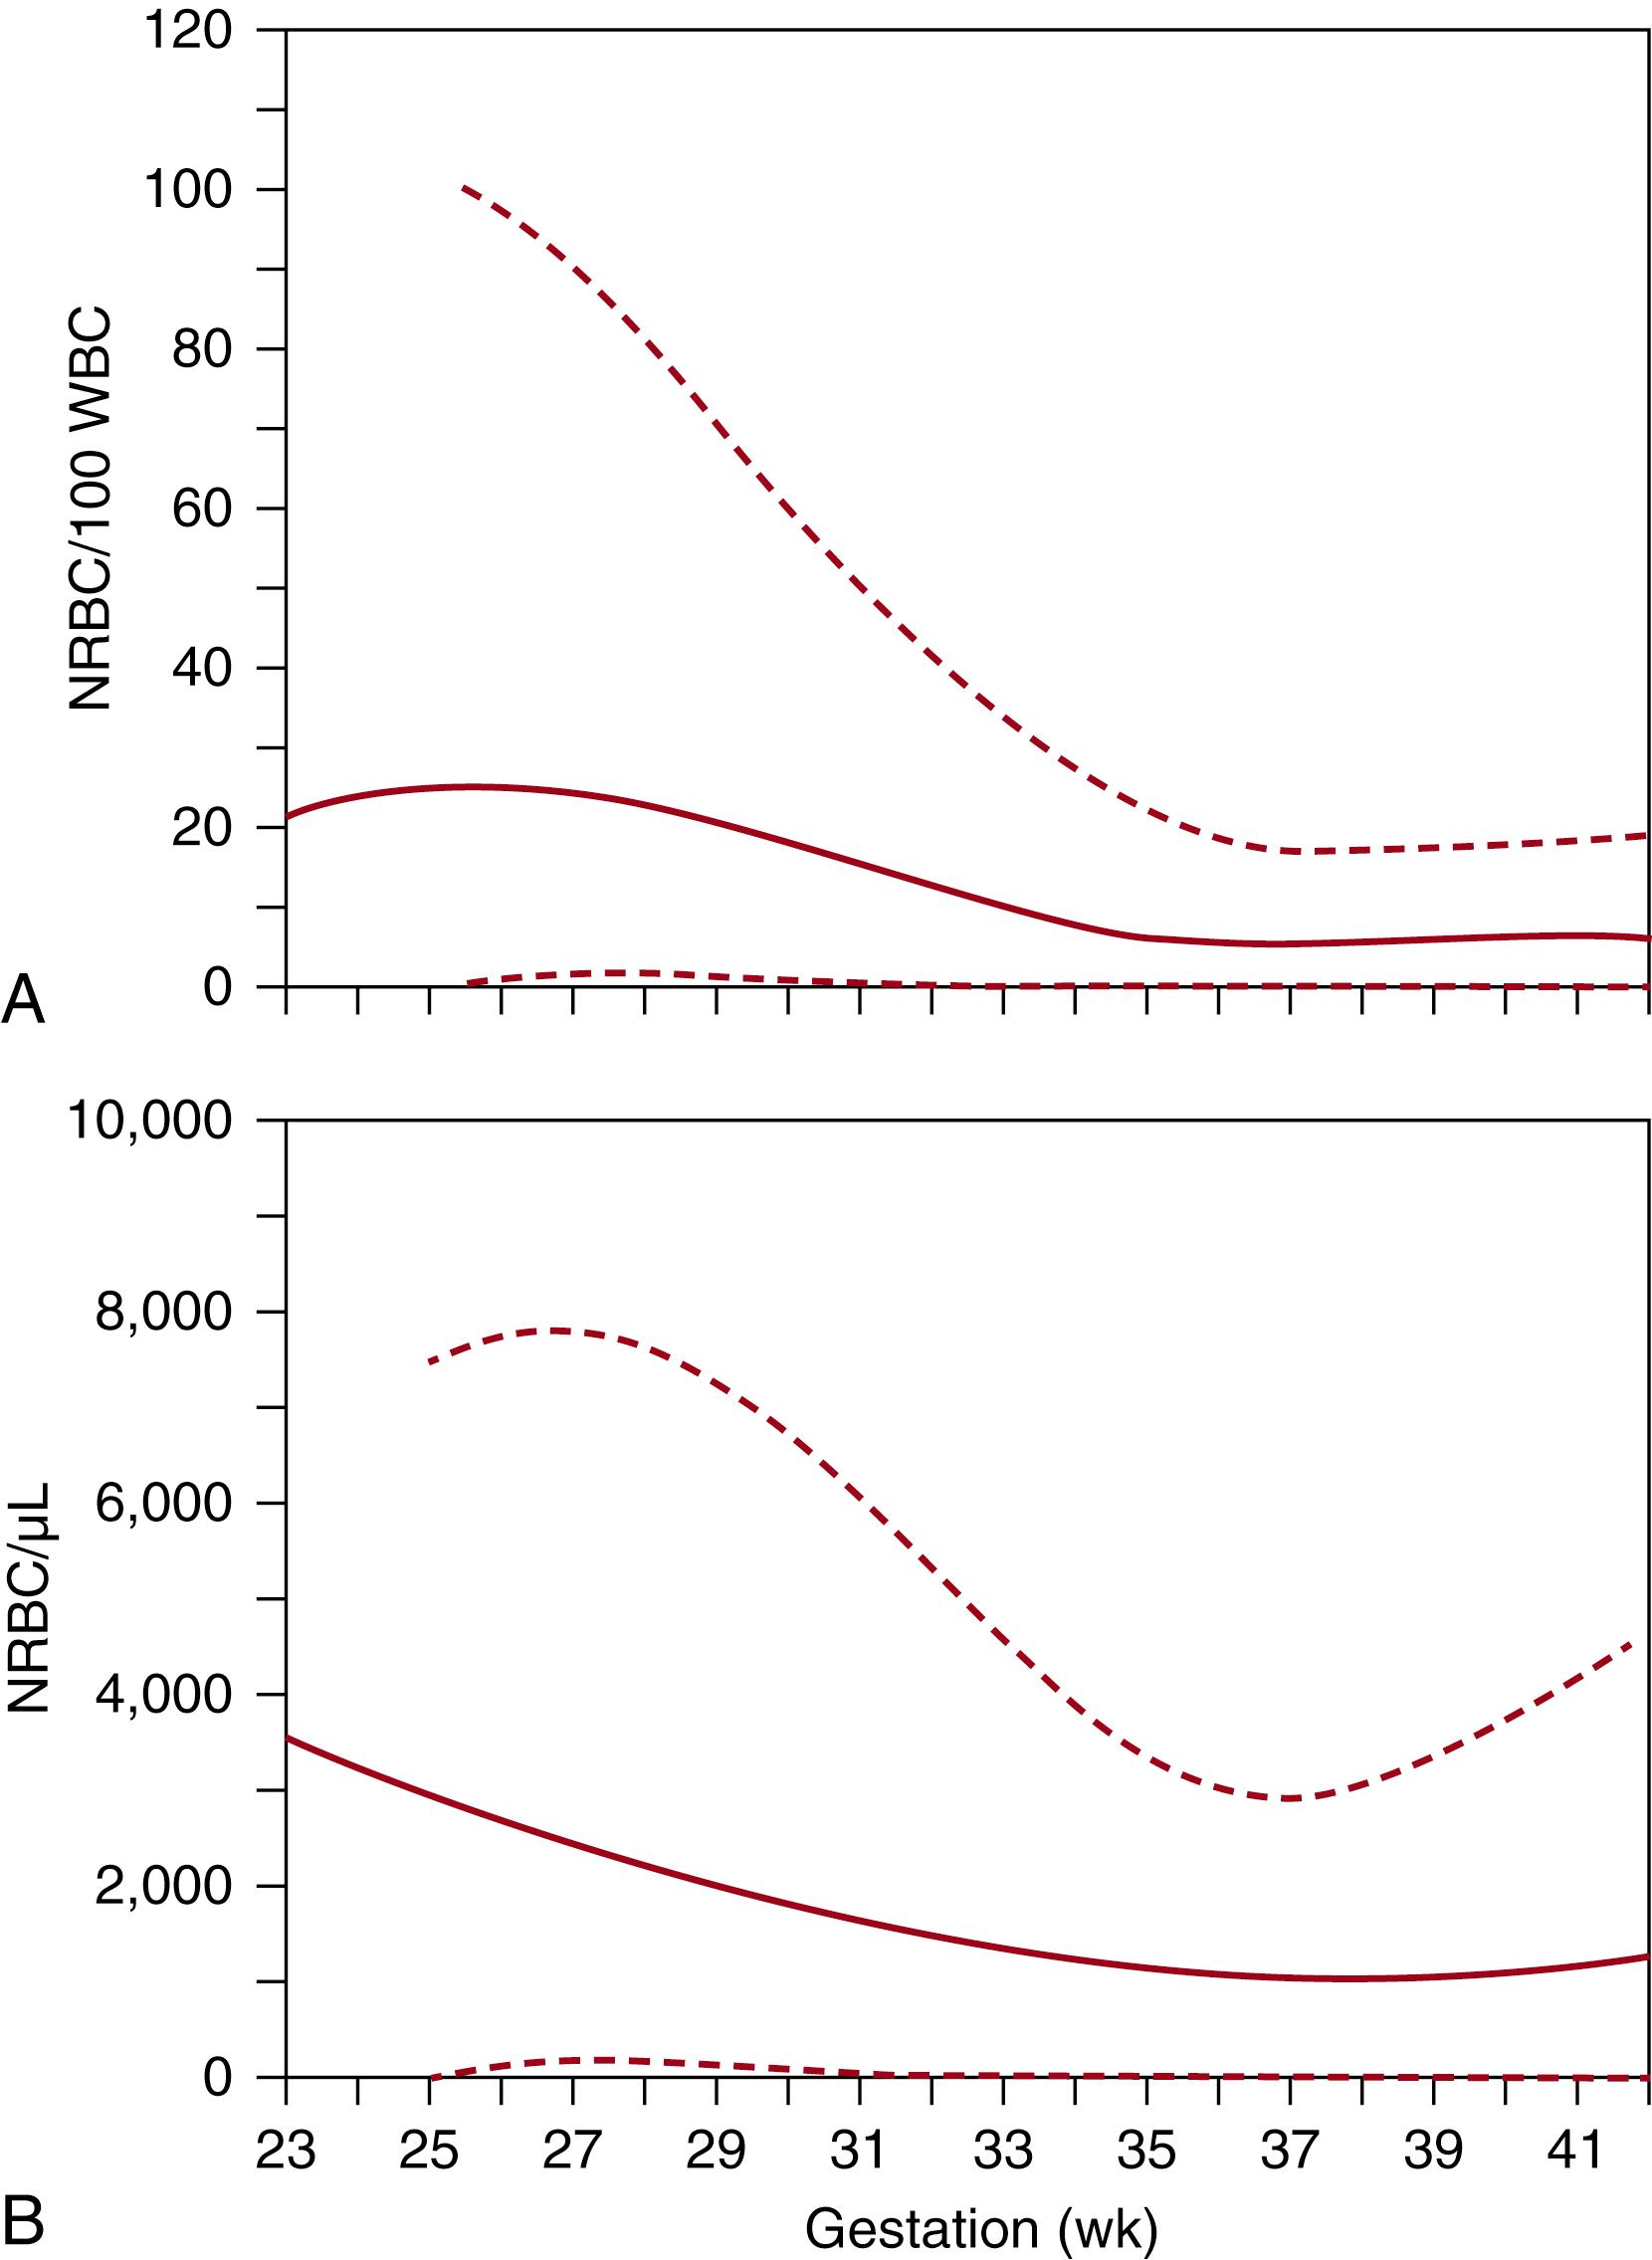 Fig. 109.6, Reference ranges for blood concentrations of nucleated red blood cell (NRBC) on the day of birth by gestational age. The lower and upper lines represent the 5th and 95th percentile limits. The middle line represents the mean value. (A) Data expressed as NRBC/100 white blood cell (WBC) . (B) Data expressed as NRBC/μL. (From Christensen RD, Henry E, Andres RL, et al. Reference ranges for blood concentrations of nucleated red blood cells in neonates. Neonatology . 2011;99[4]:289–294.)